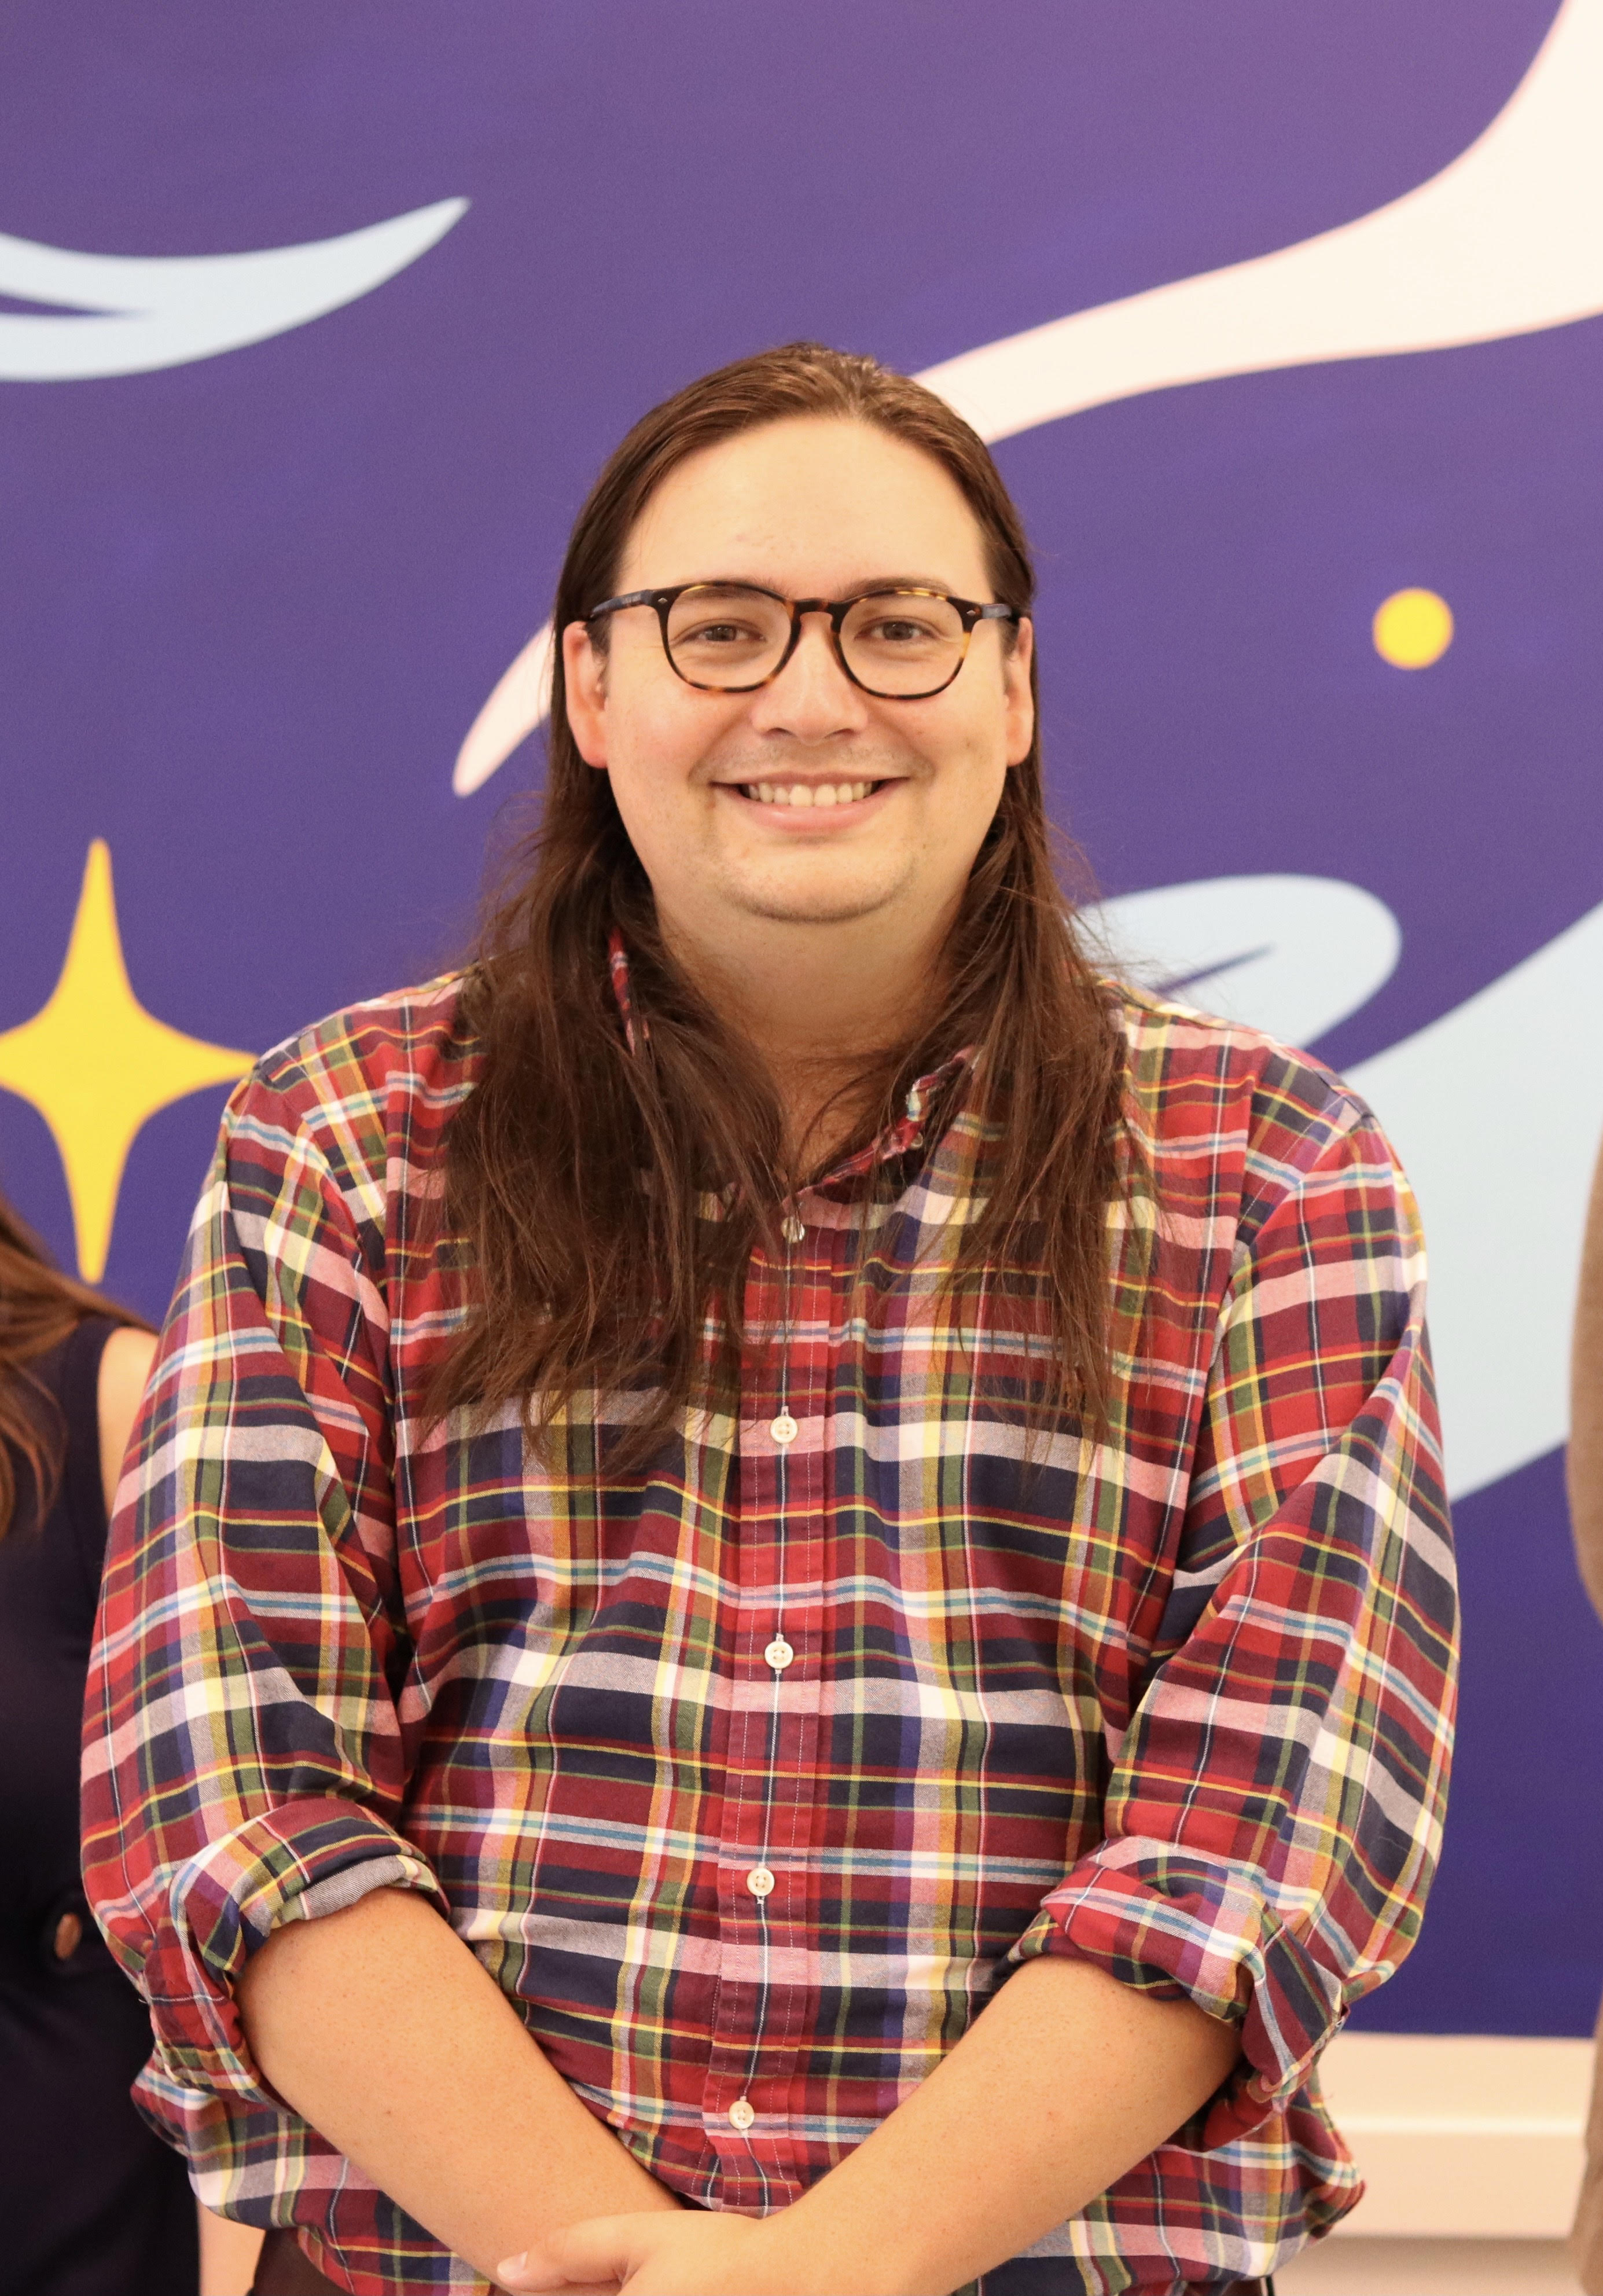 A photograph of a person with long hair and glasses, wearing a red plaid shirt and smiling into the camera